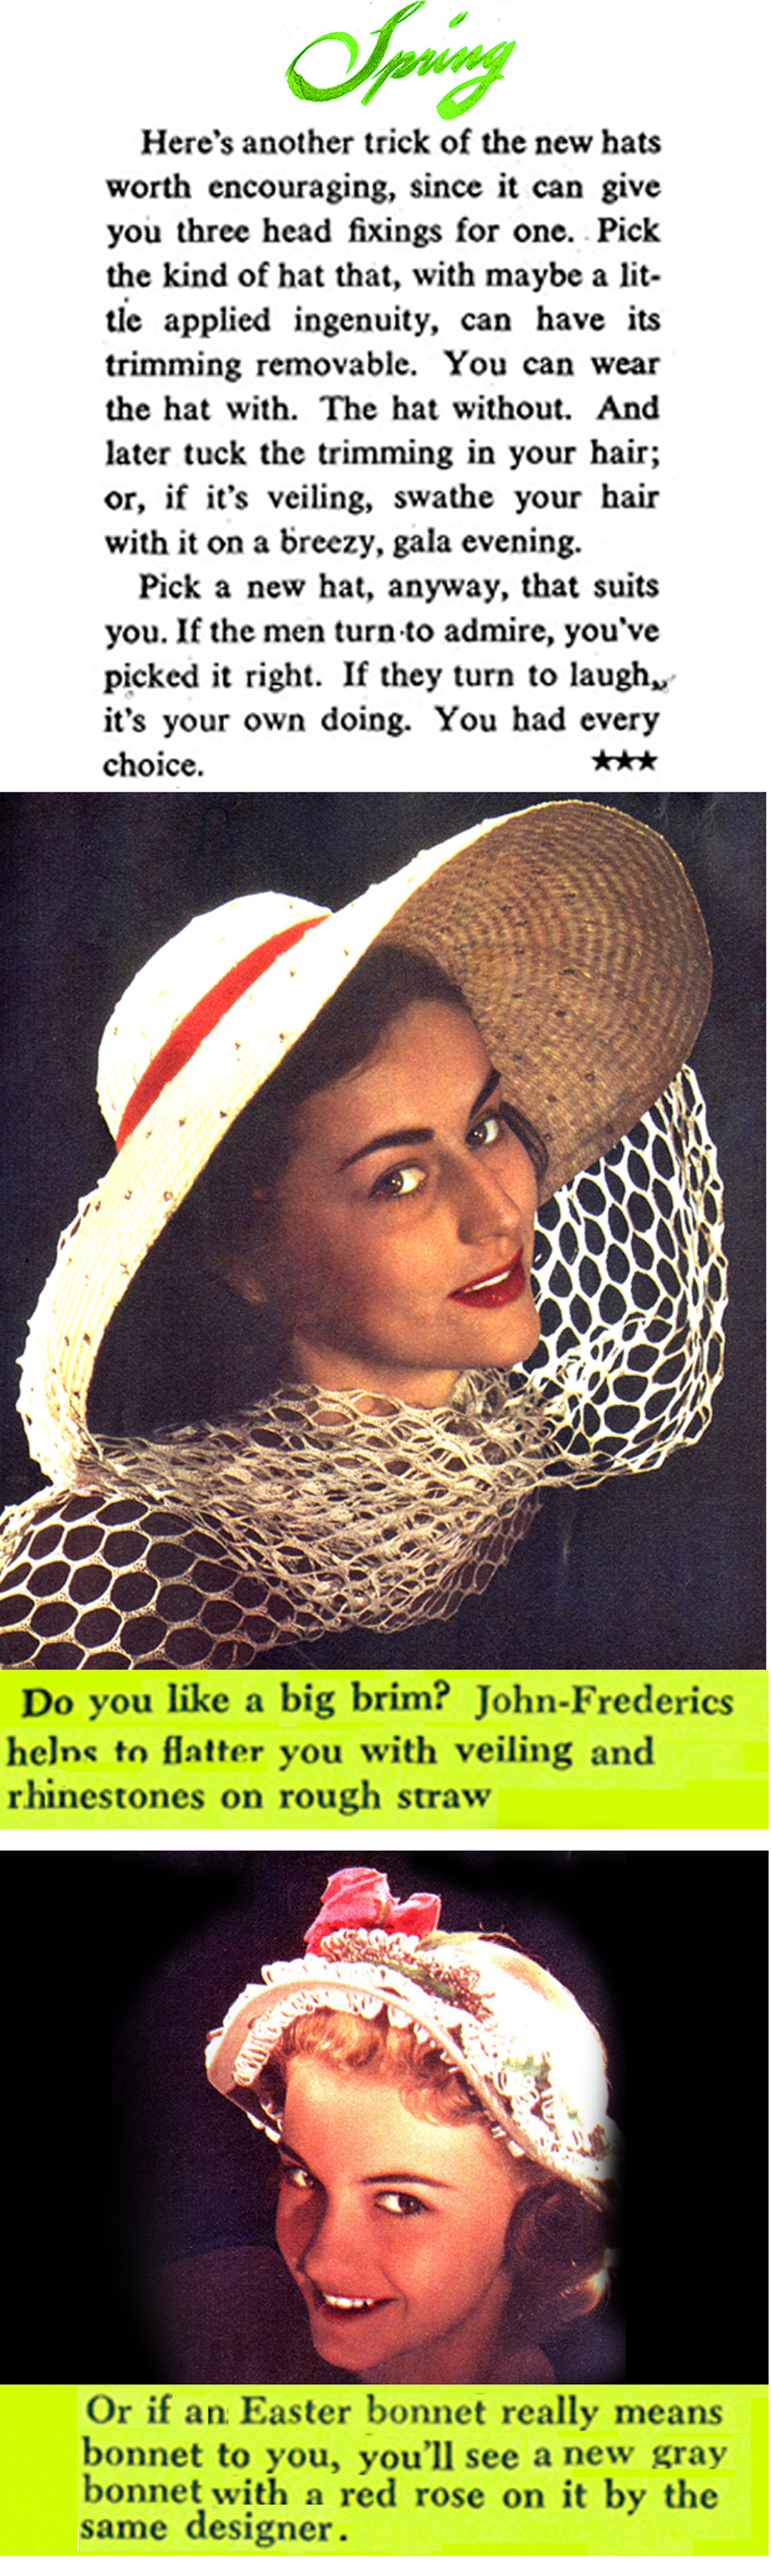 The Hats of 1947 (Collier's Magazine, 1947)